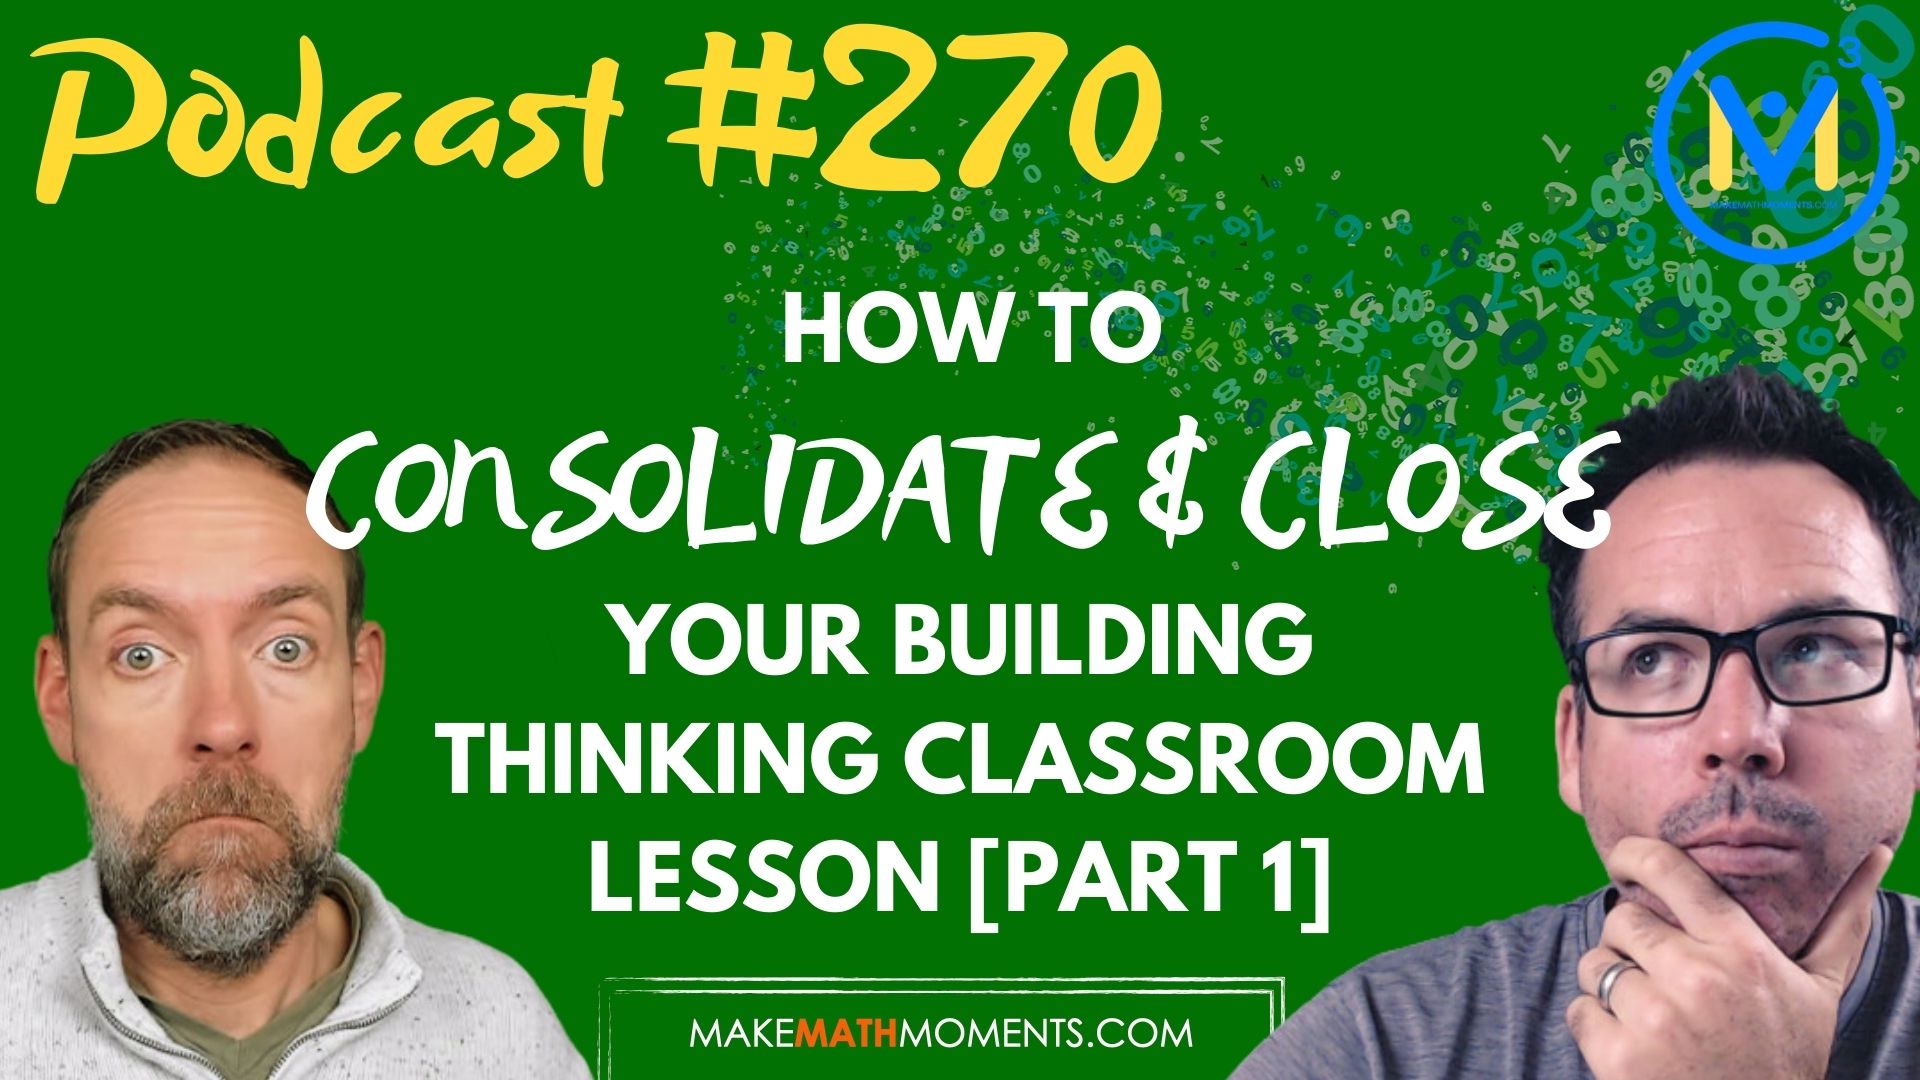 Episode #270: How To Consolidate & Close Your Building Thinking Classroom Lesson [Part 1] 